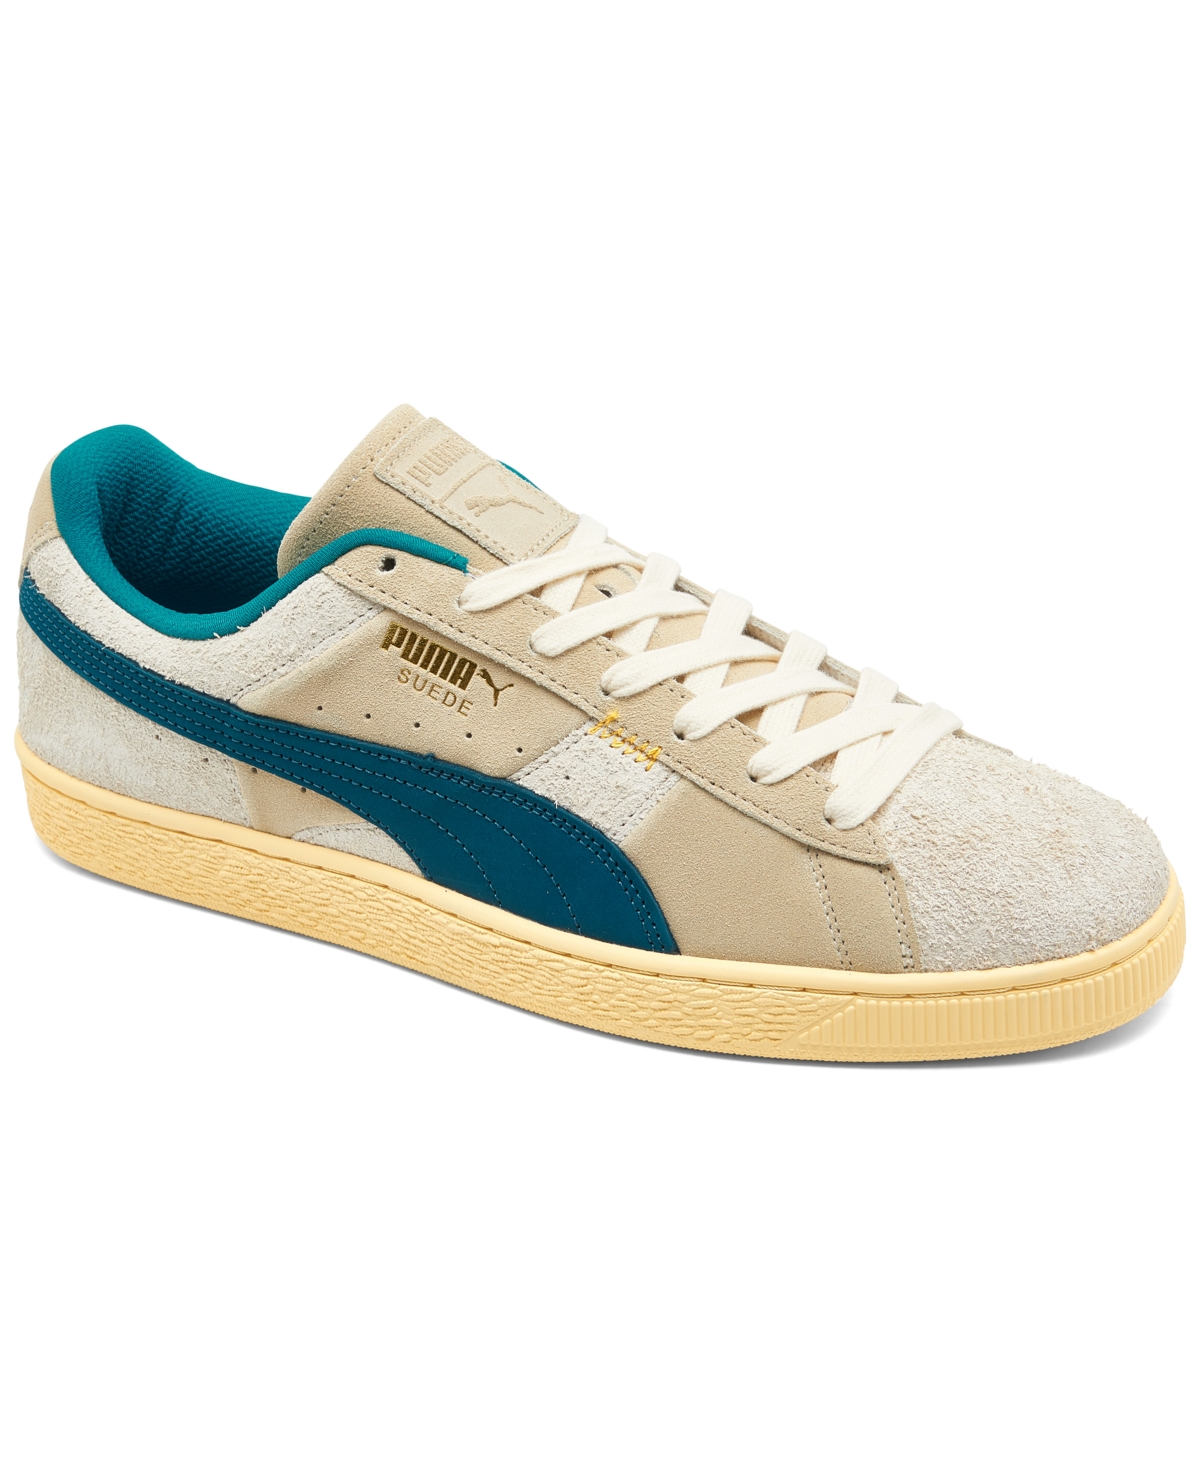 Puma Men's Suede Underdogs Casual Sneakers From Finish Line In Sugared Almond/ocean Tropic/putty